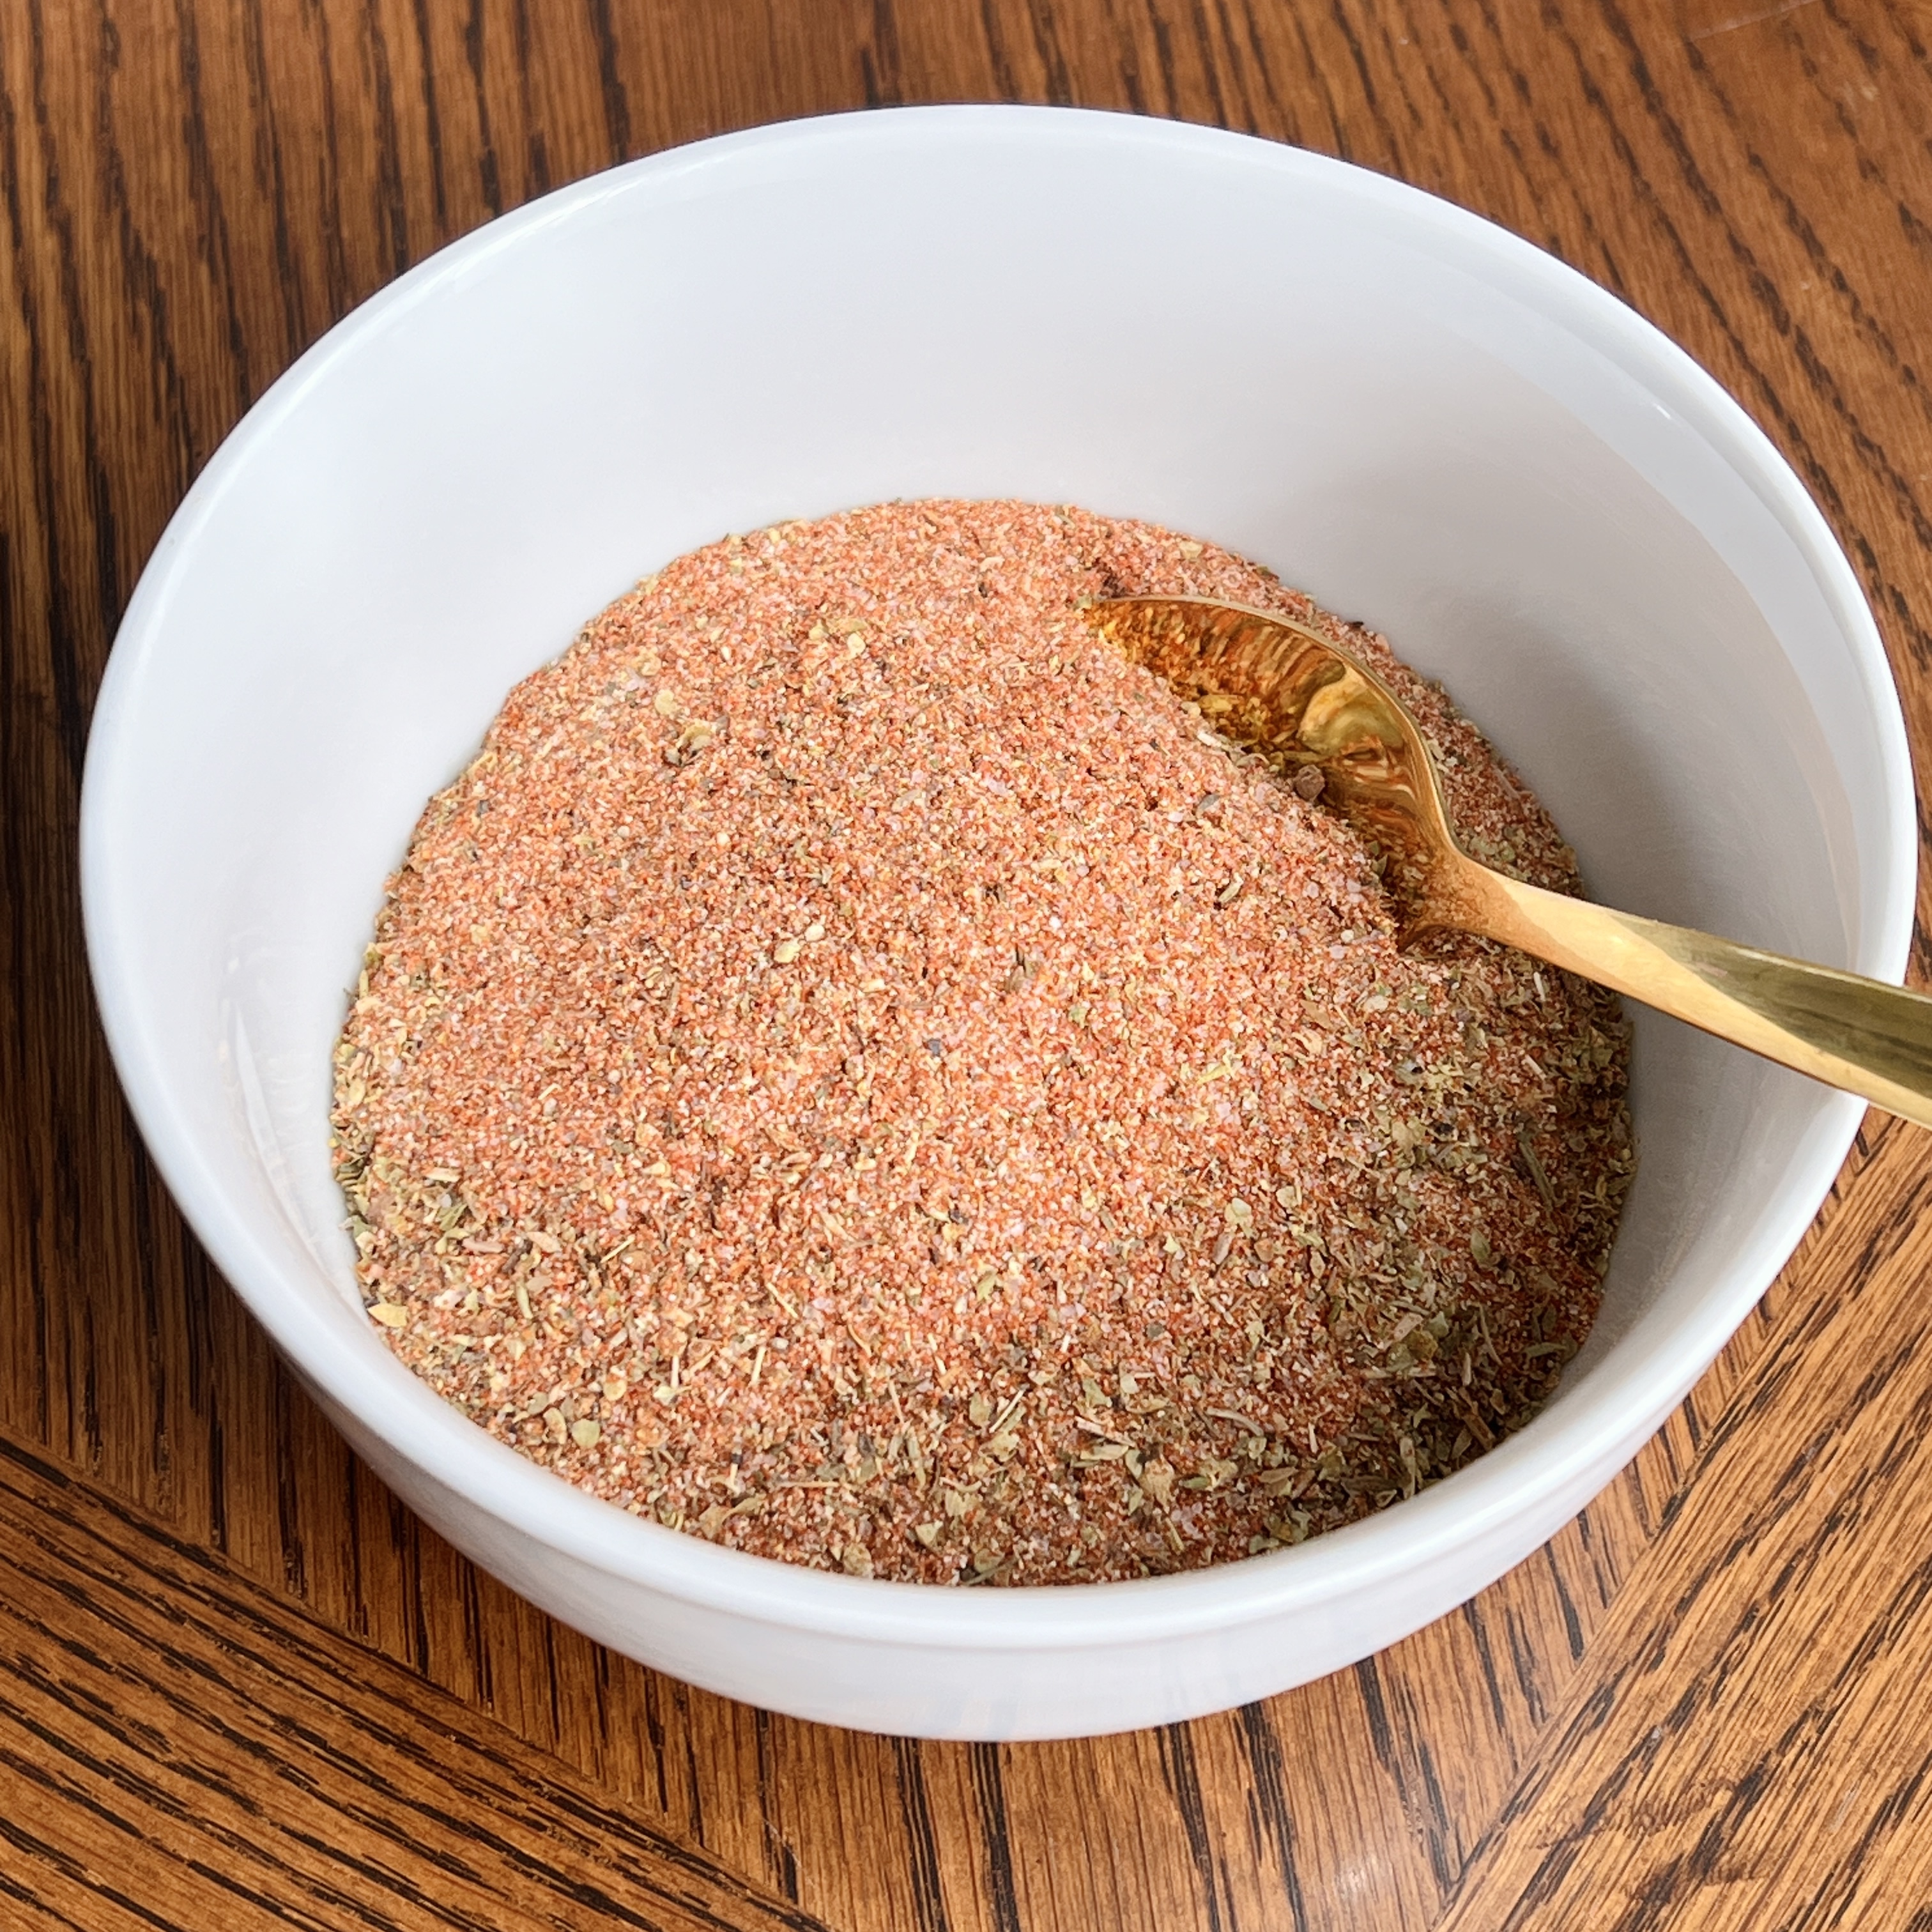 Homemade Cajun-Style Spice Blend for Soups, Rubs, and More